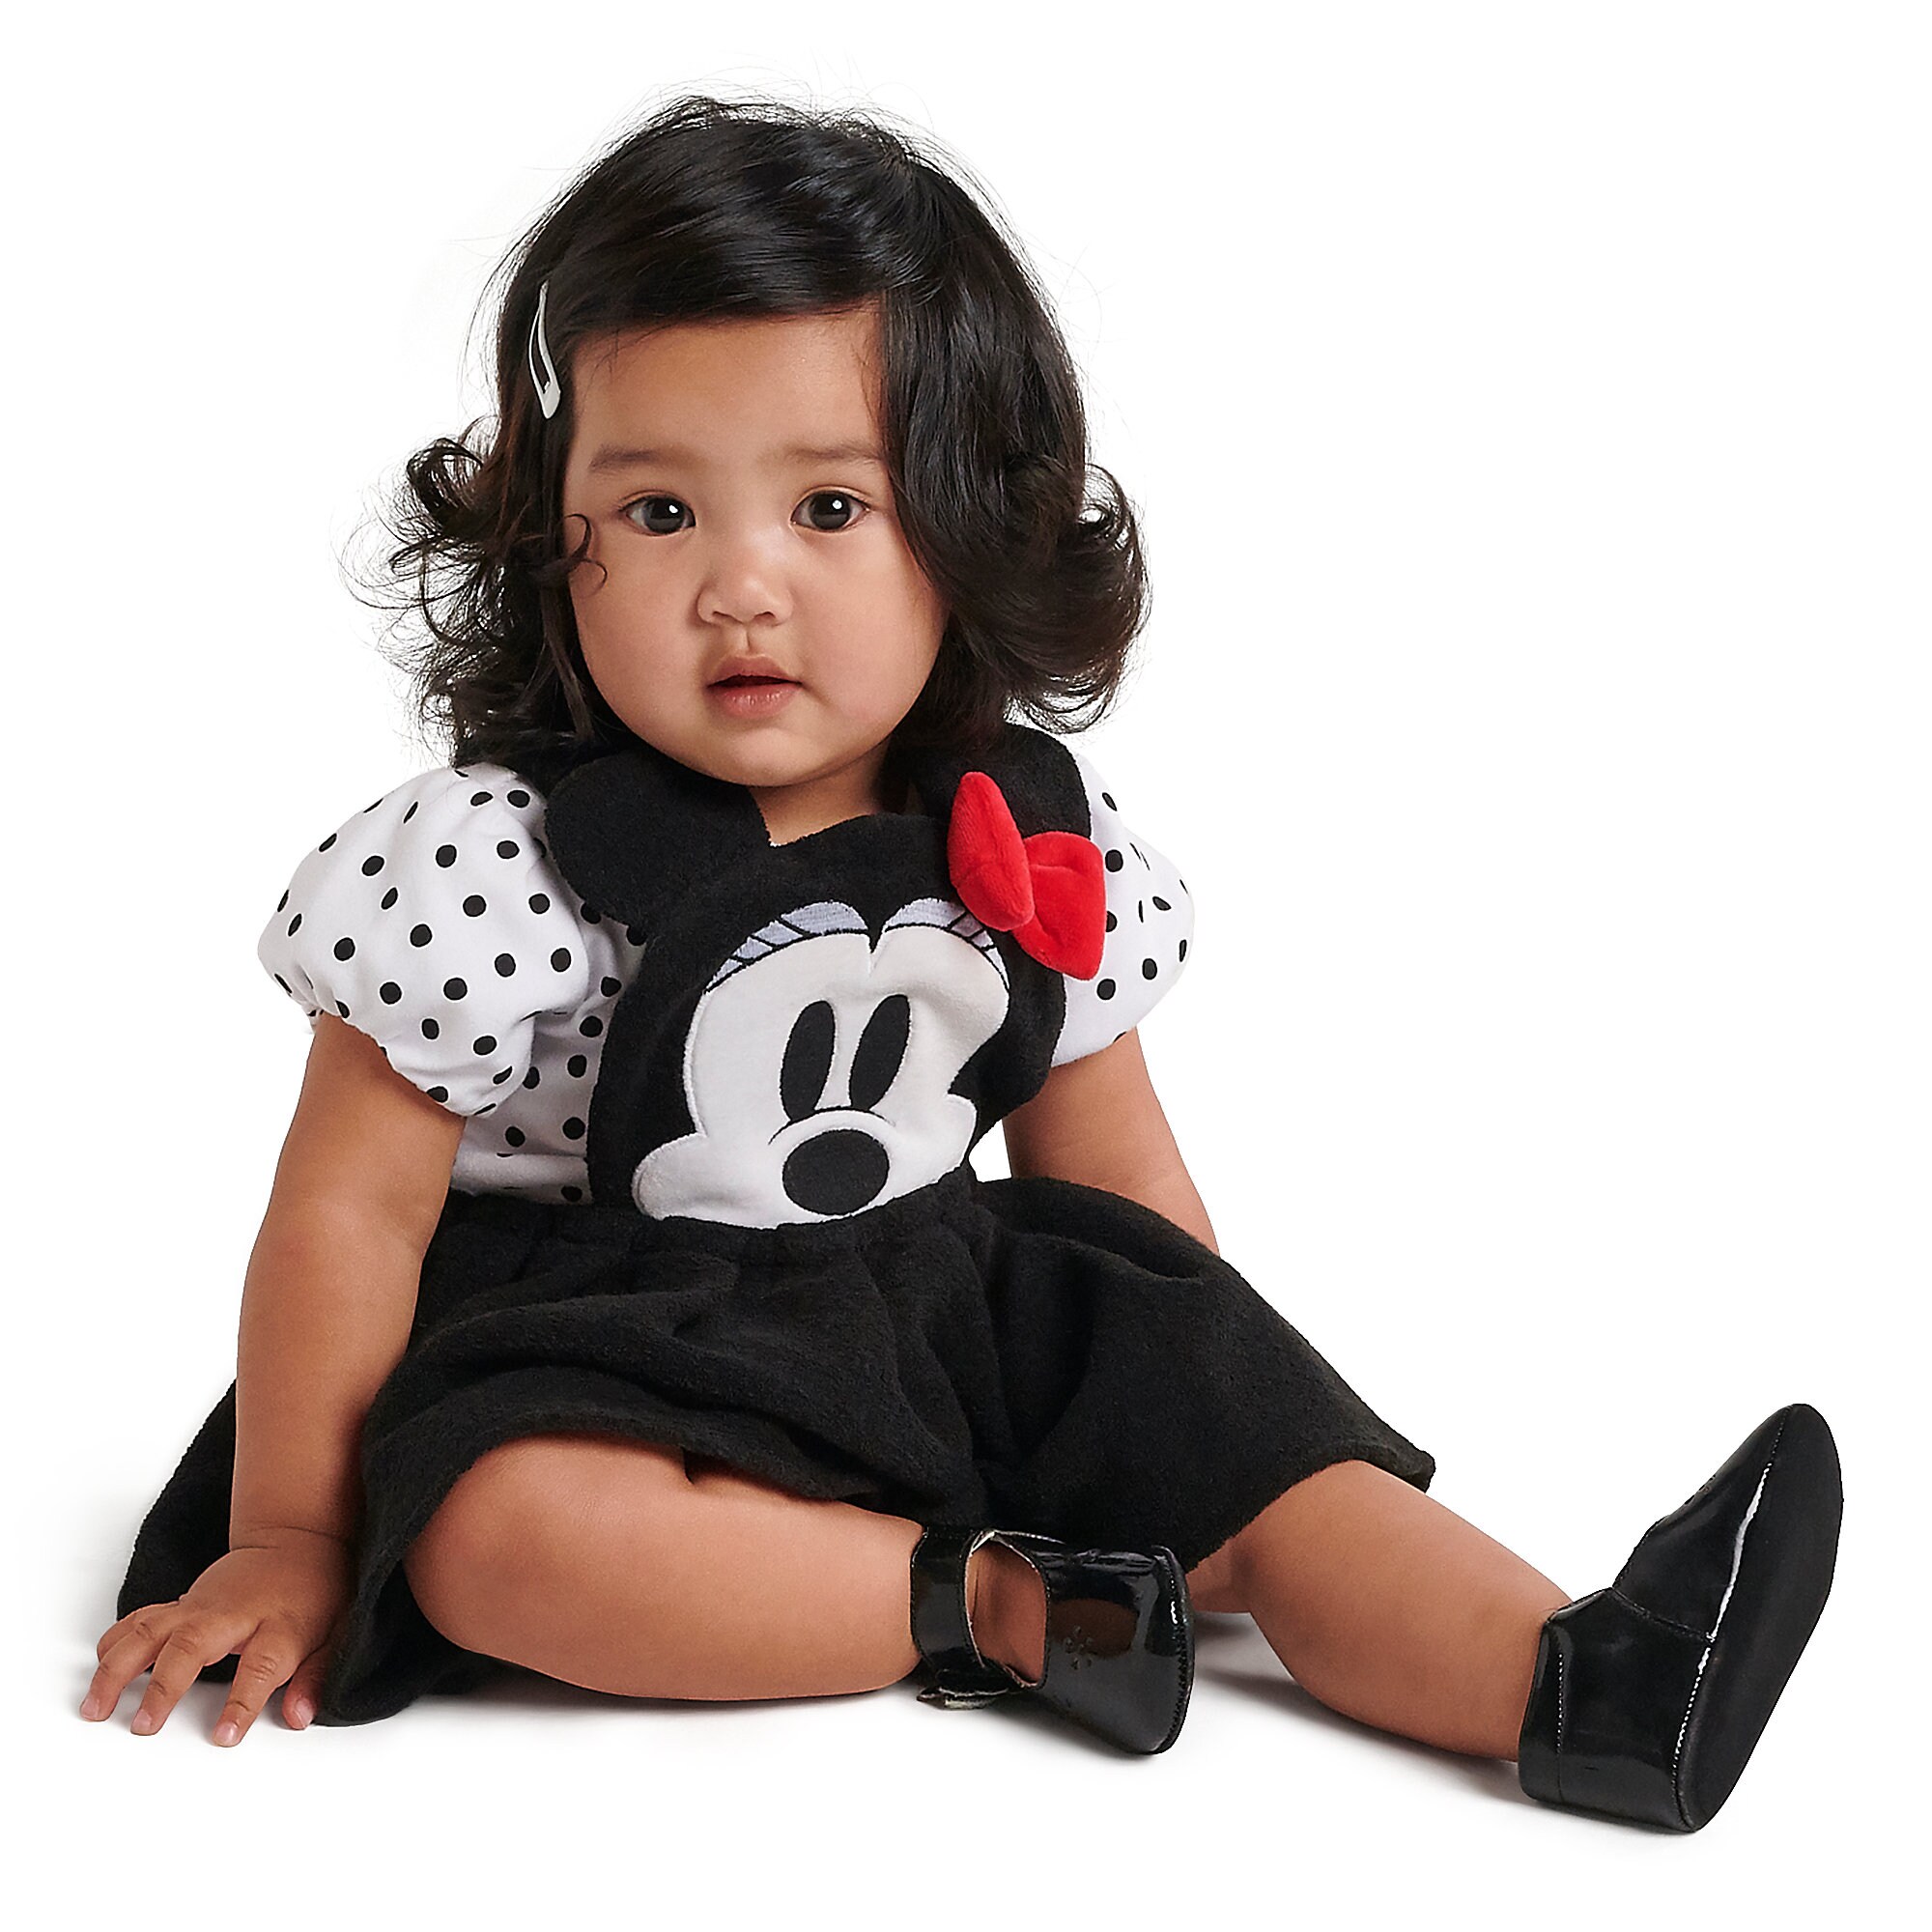 Minnie Mouse Jumper Dress Set for Baby now available ...